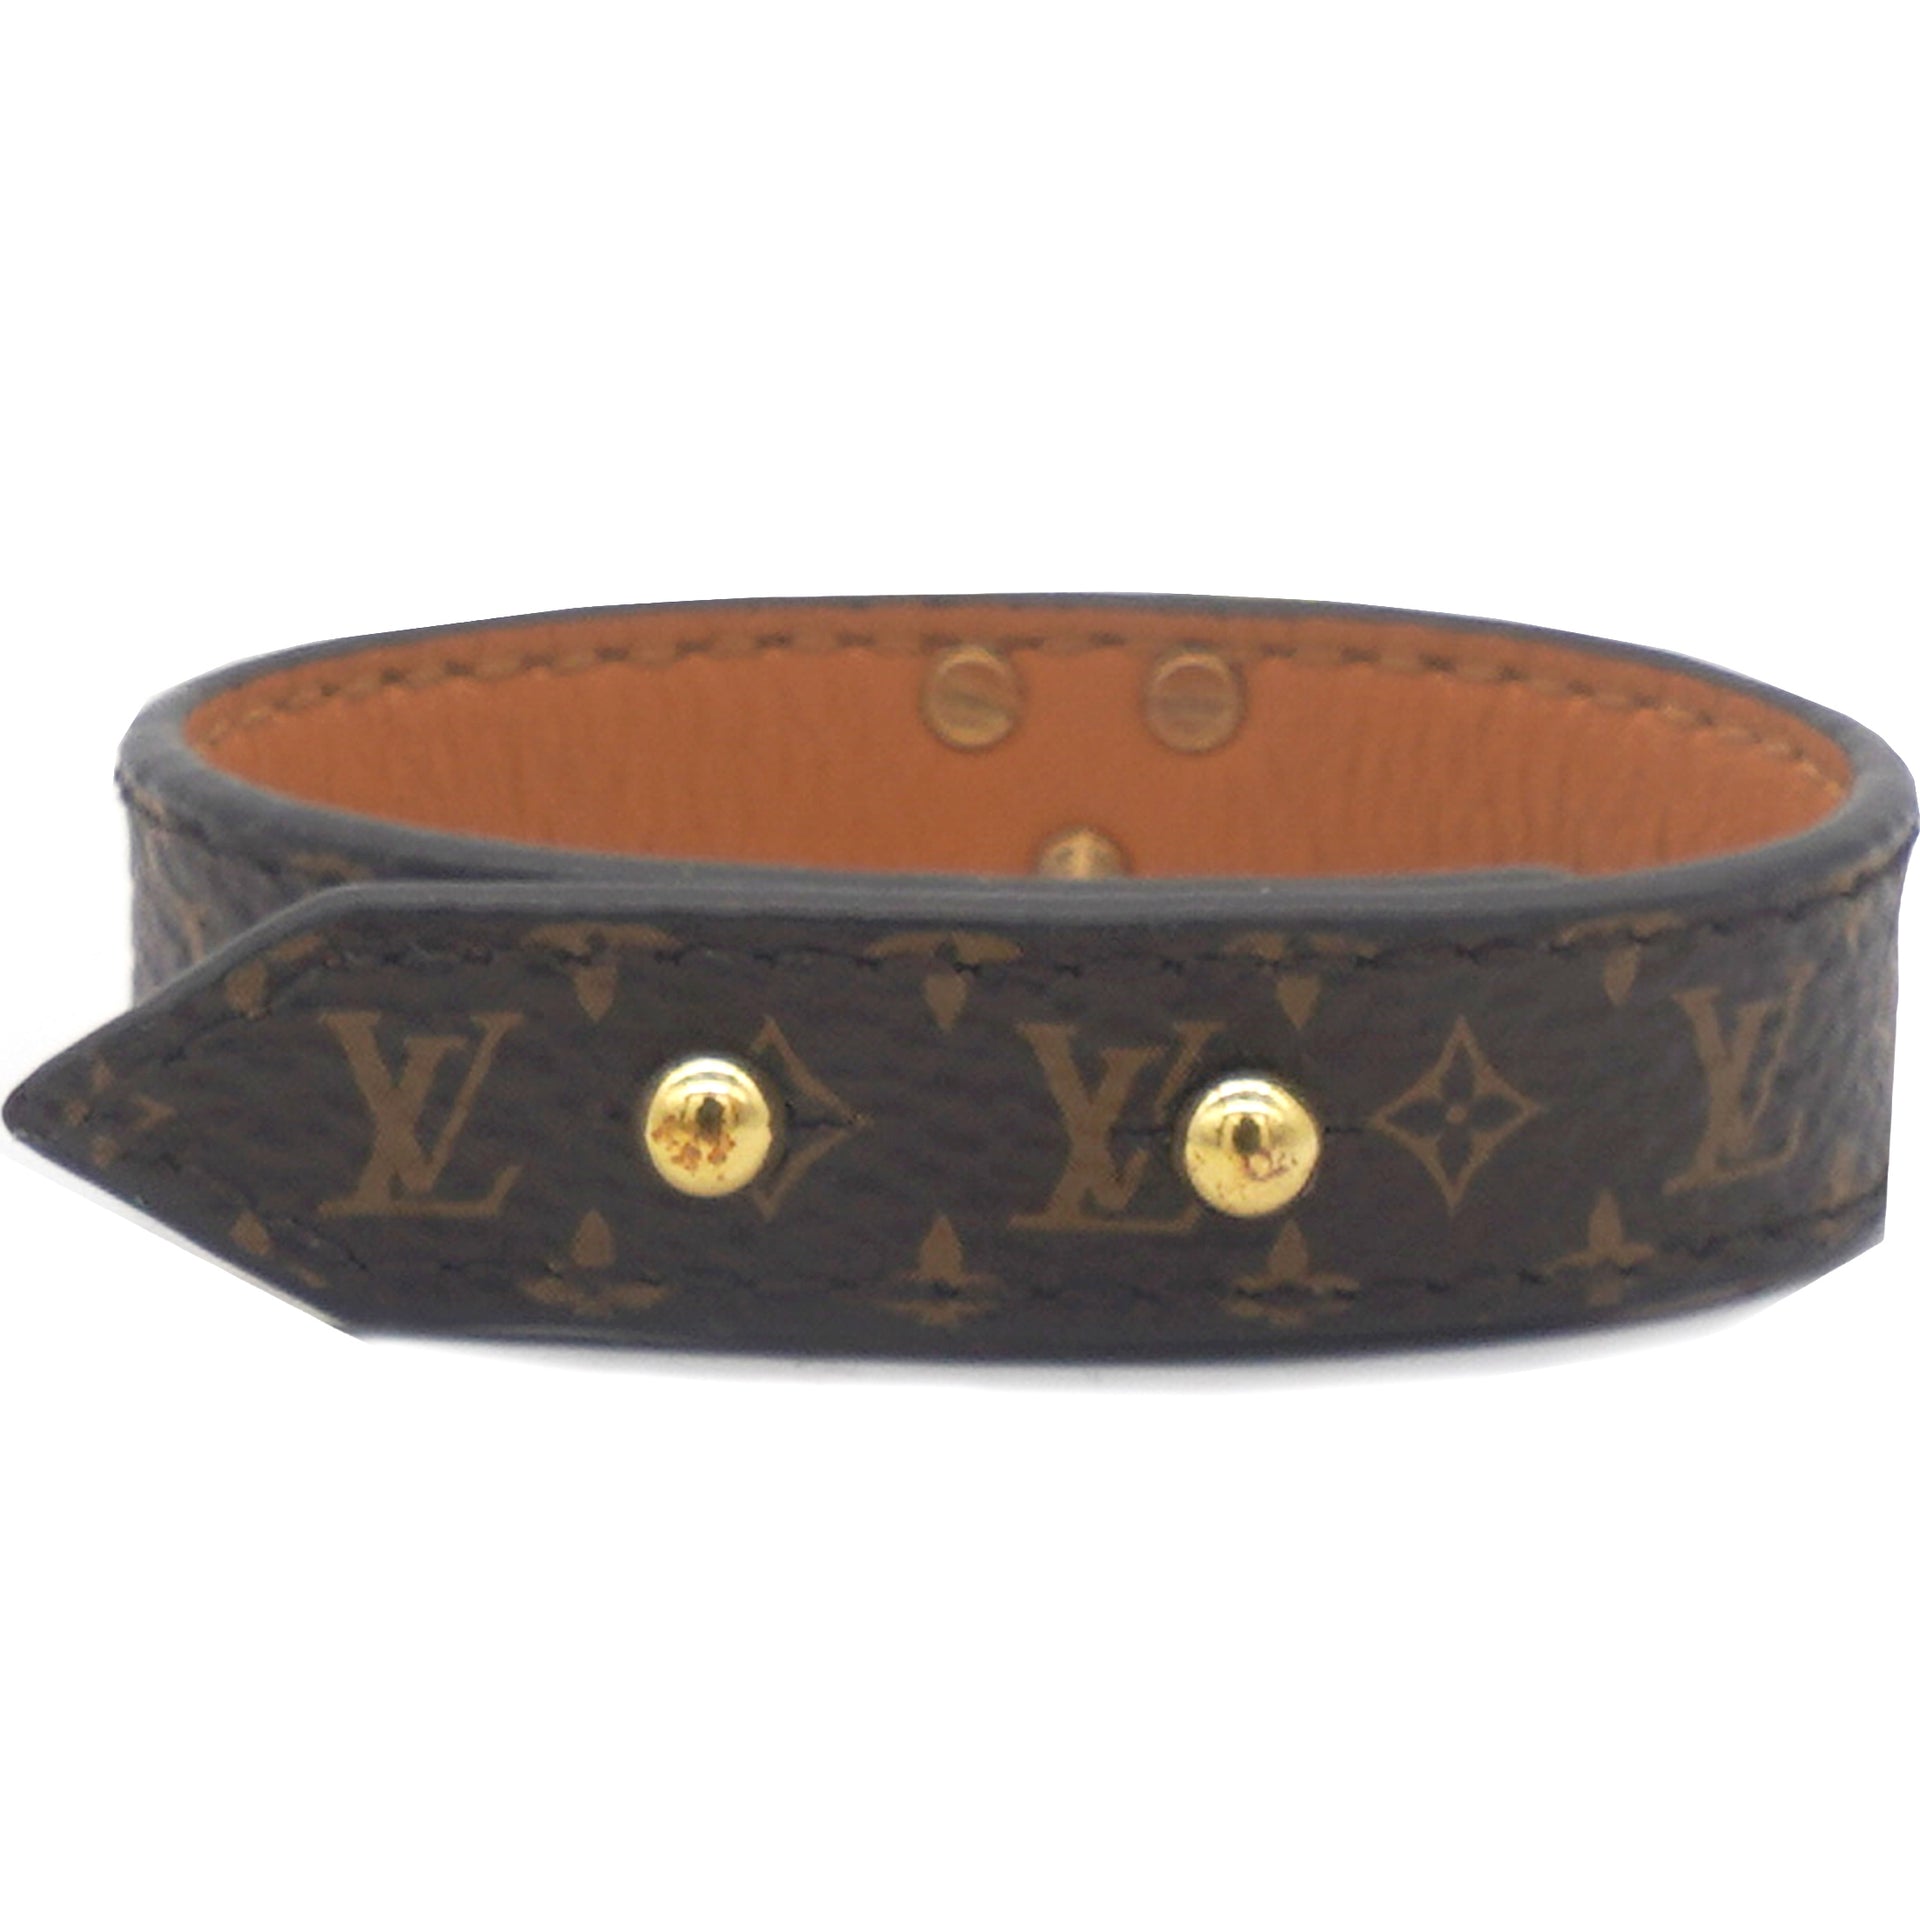 First Louis Vuitton Purchase, Essential V Bracelet